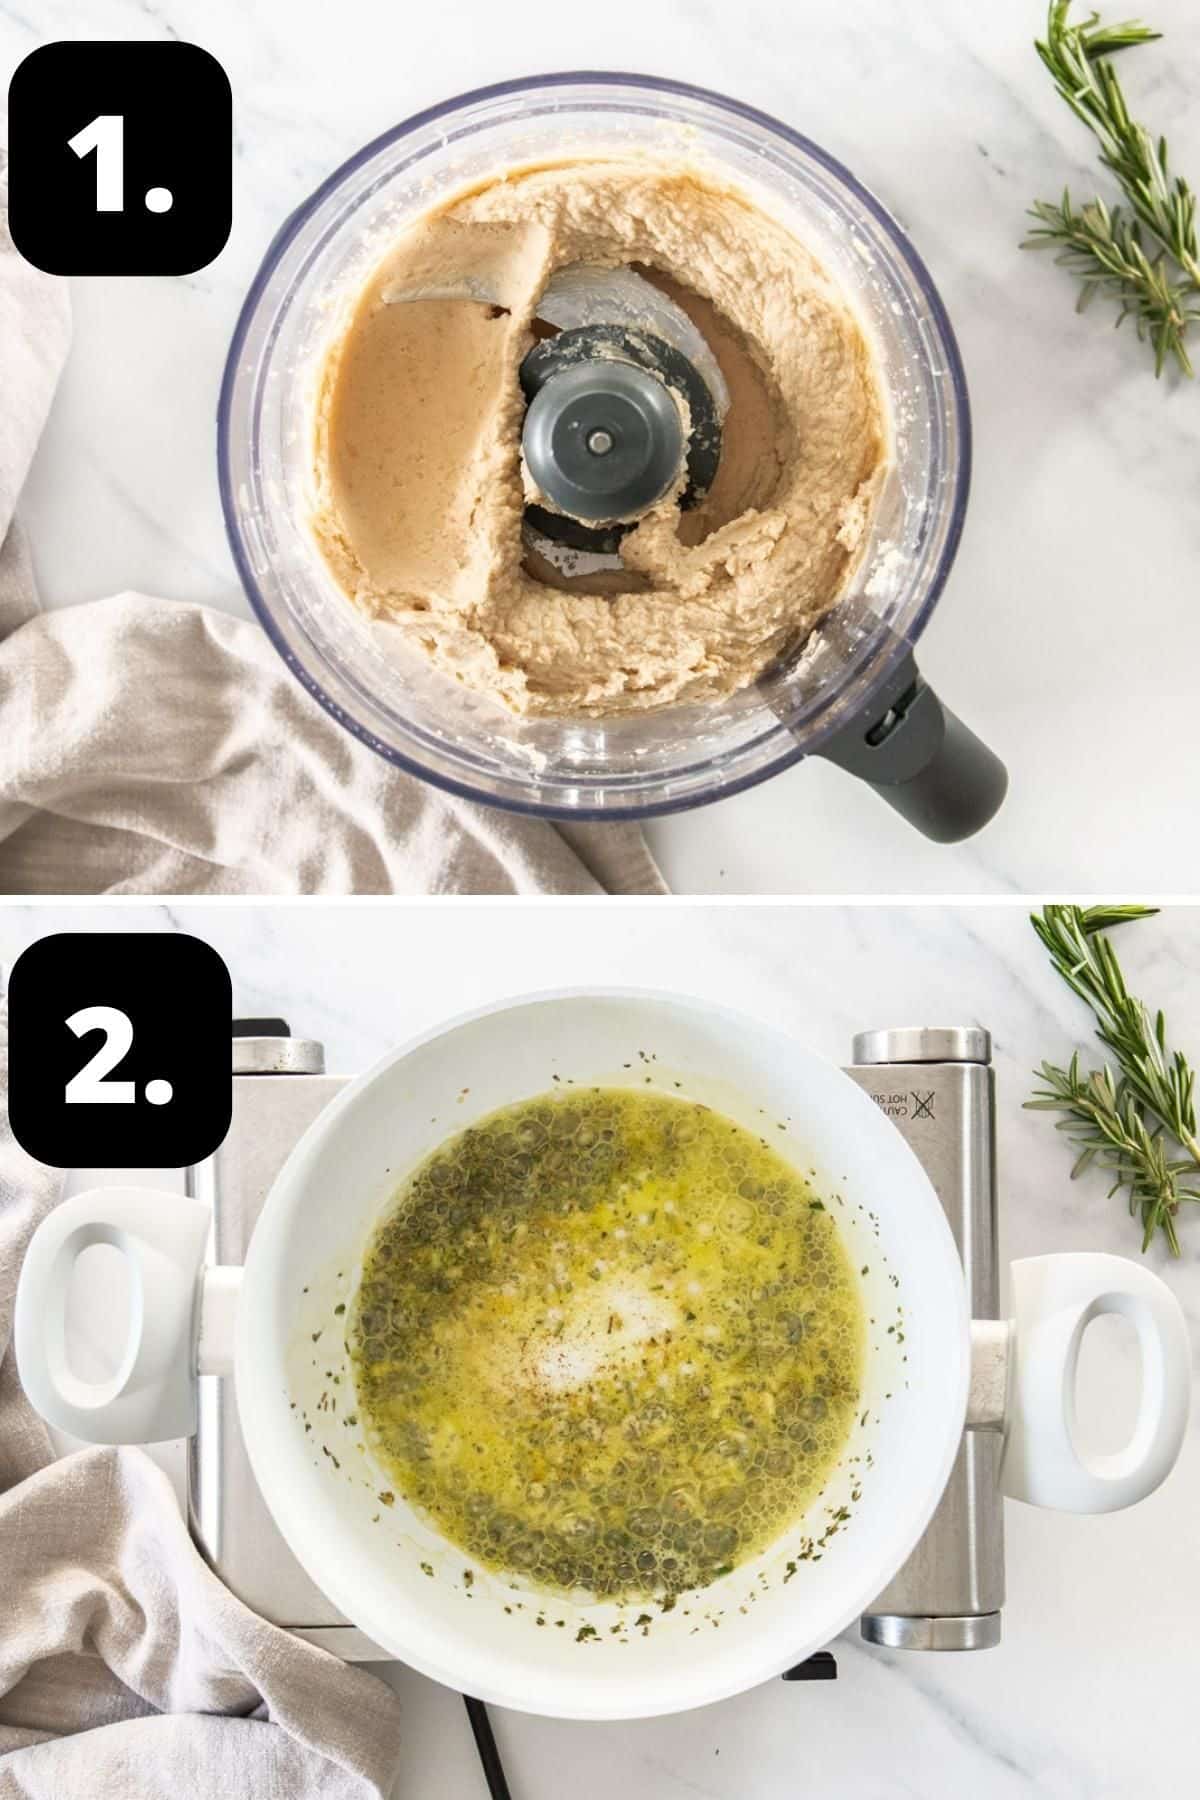 Steps 1-2 of preparing this recipe - the beans blended in a food processor and the garlic, oil and rosemary in a saucepan.